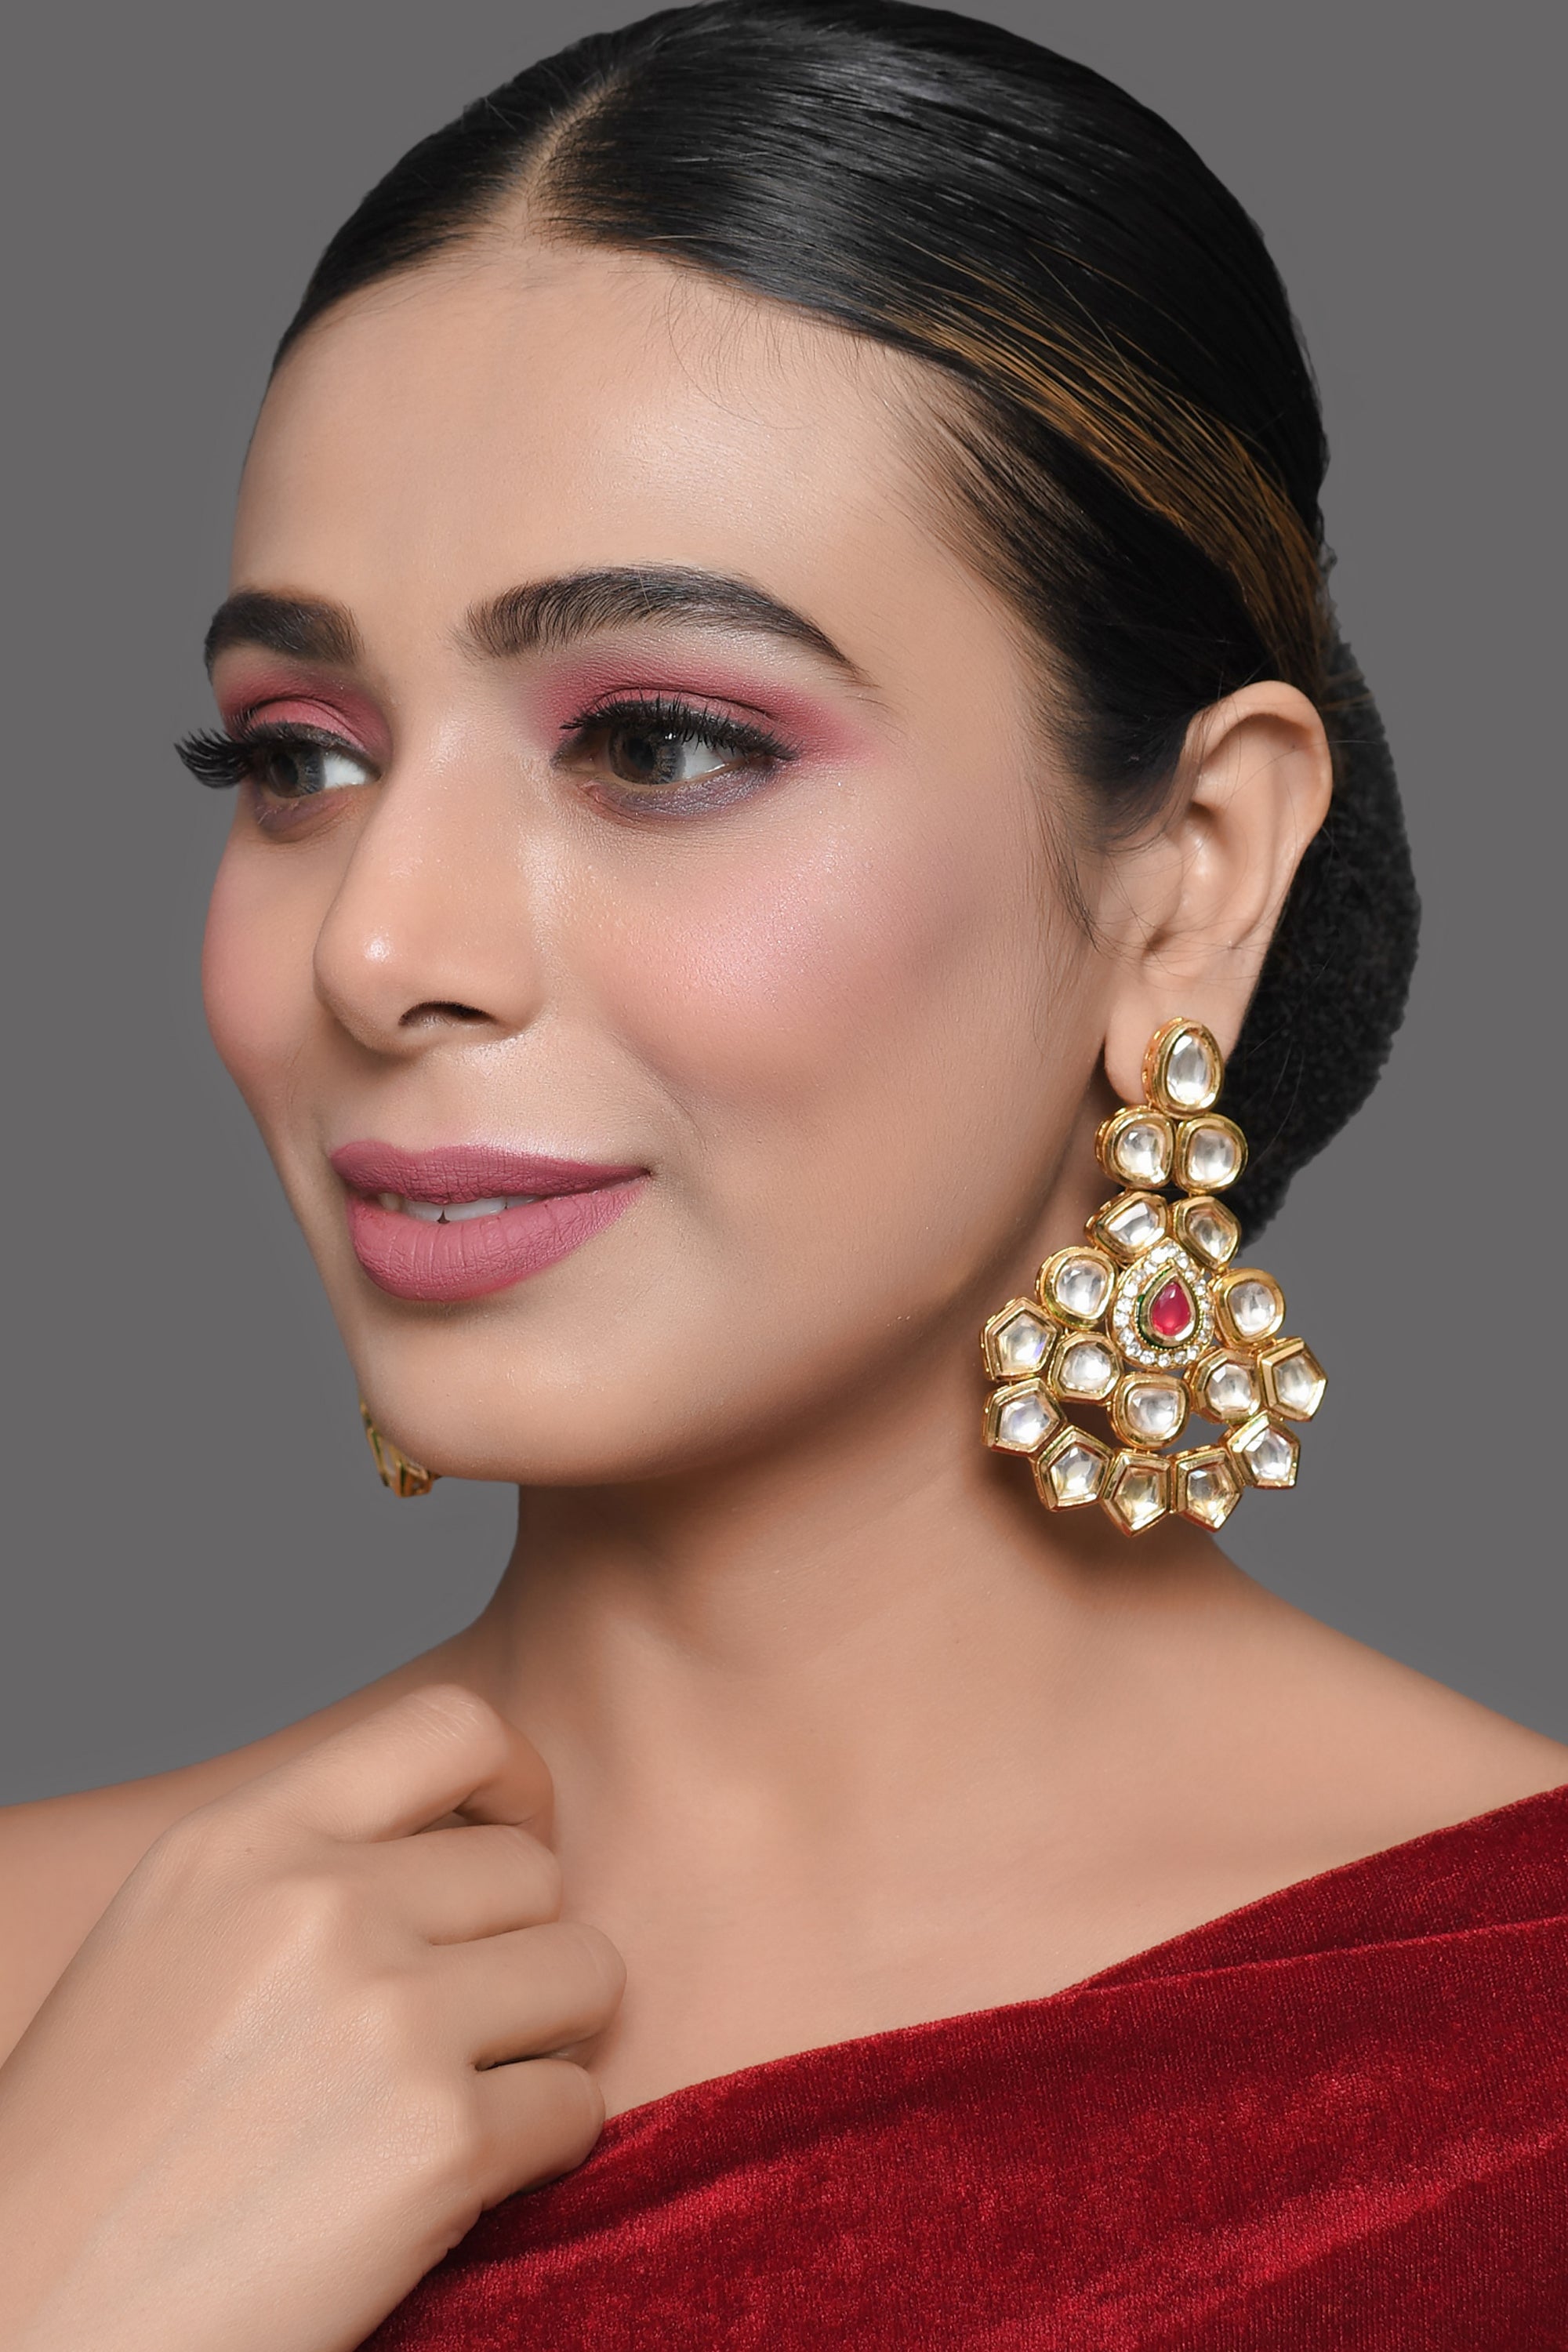 Handcrafted Kundan Studded gold toned earring